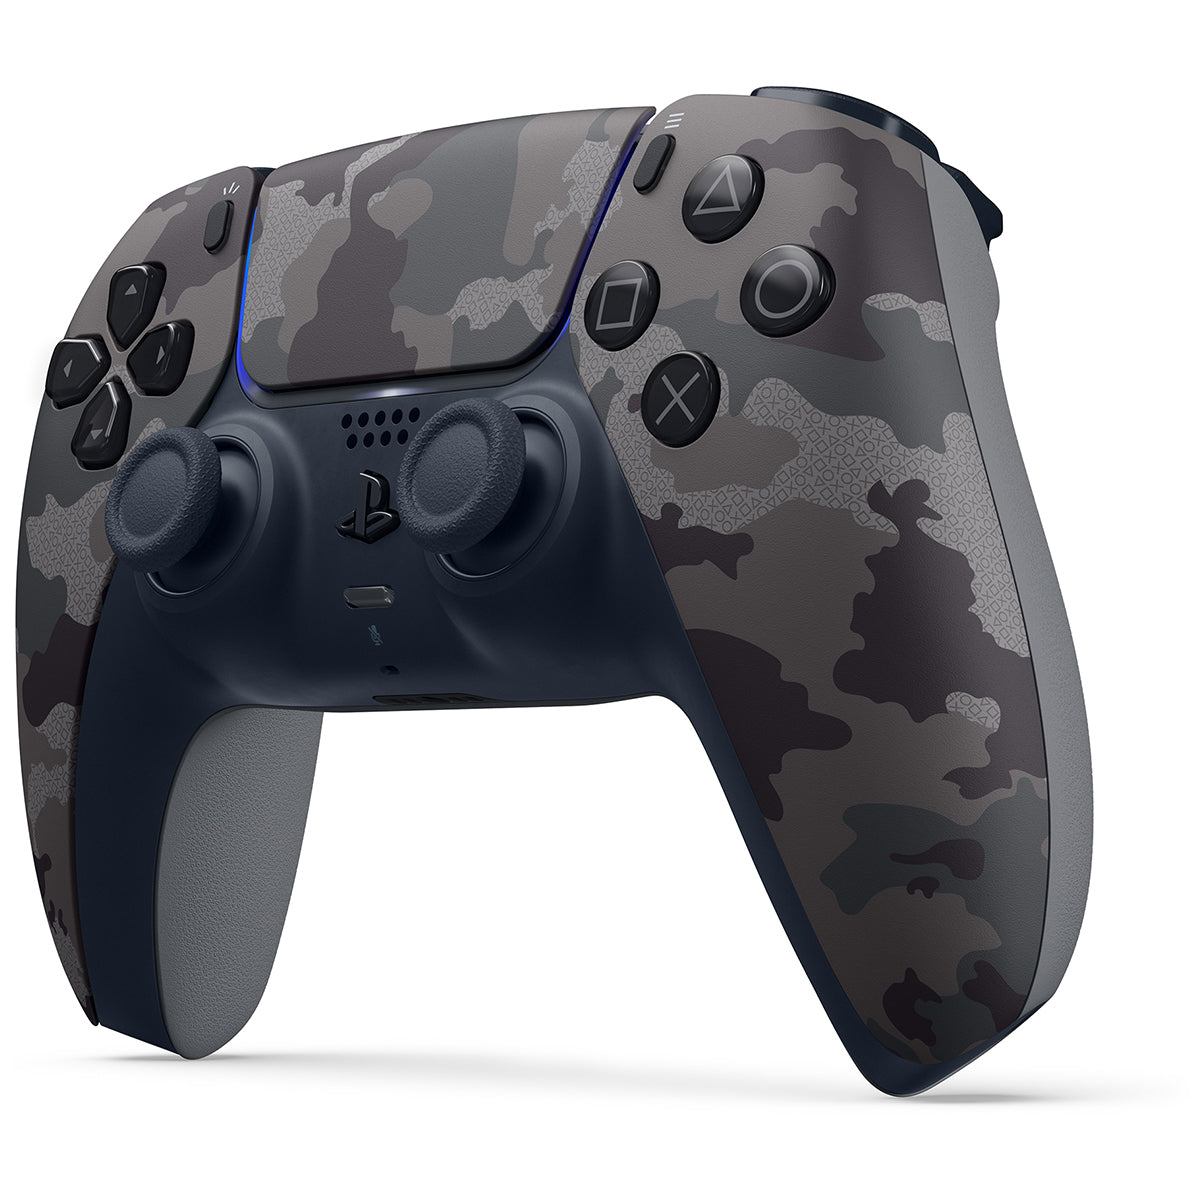 Sony Playstation 5 Digital Edition with Extra Gray Camo Controller and Dual Charging Dock Bundle - Pro-Distributing